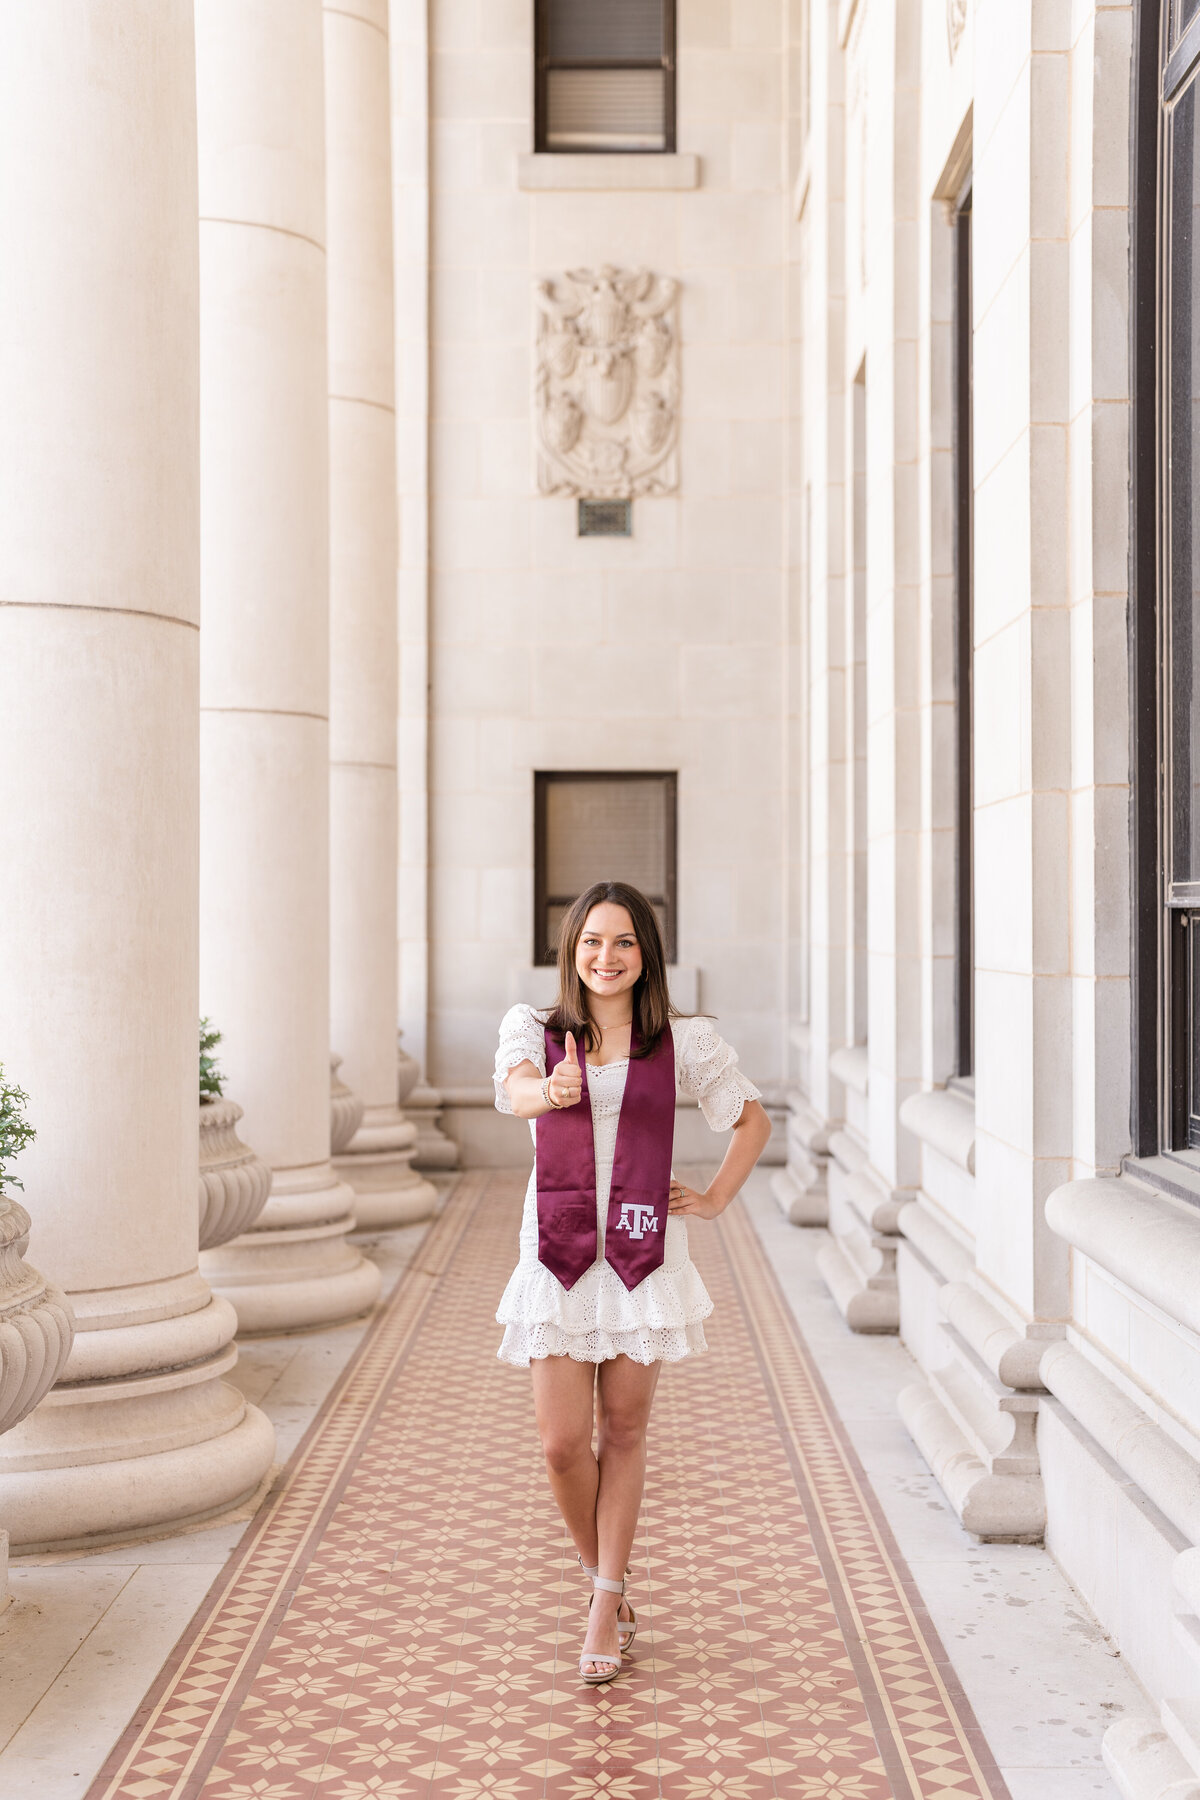 Texas A&M senior girl standing with hand on hip and thumbs up  while wearing white dress and Aggie stole in the columns of the Administration Building